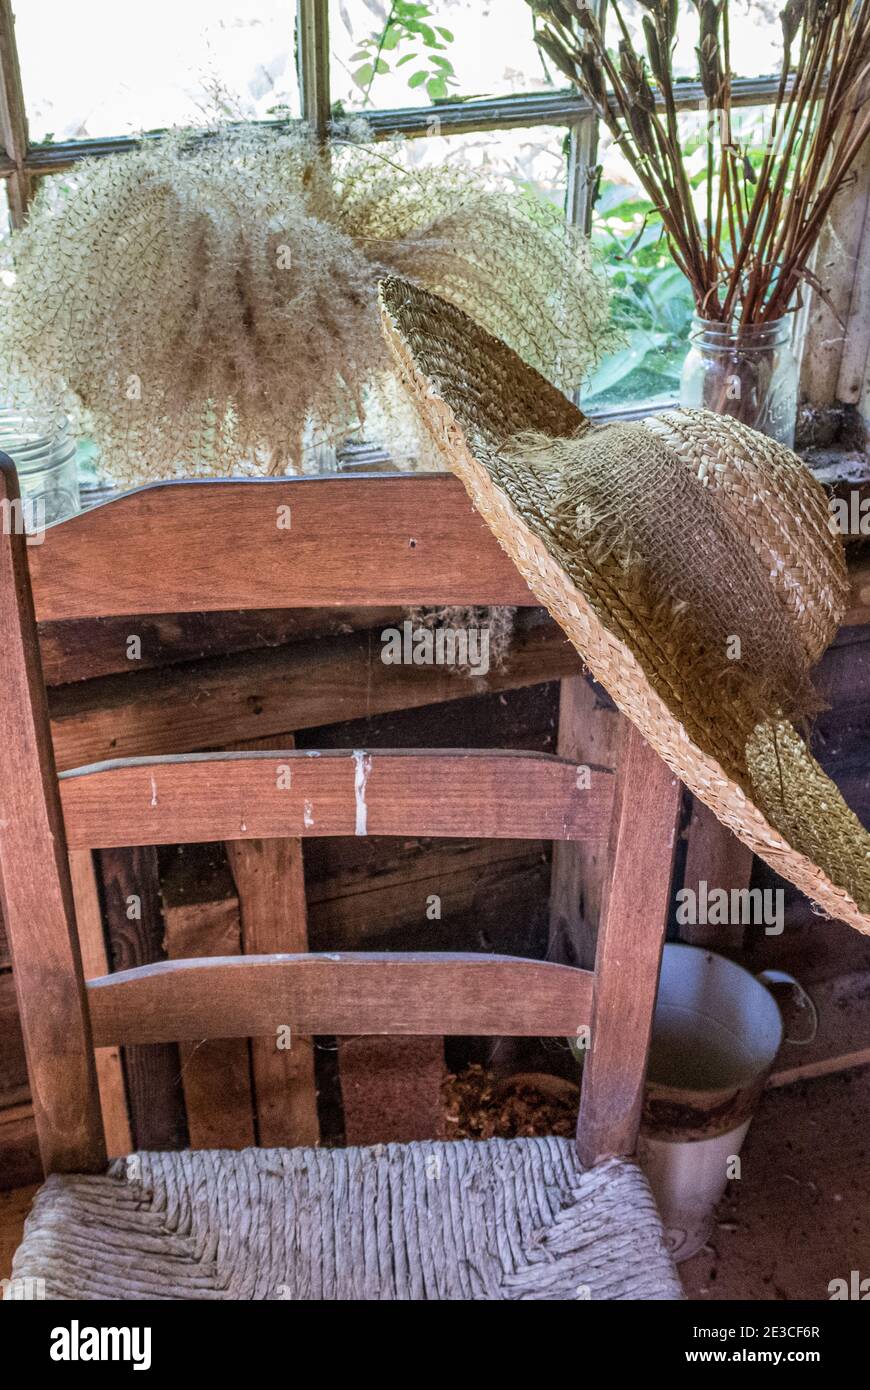 A hat and a chair Stock Photo